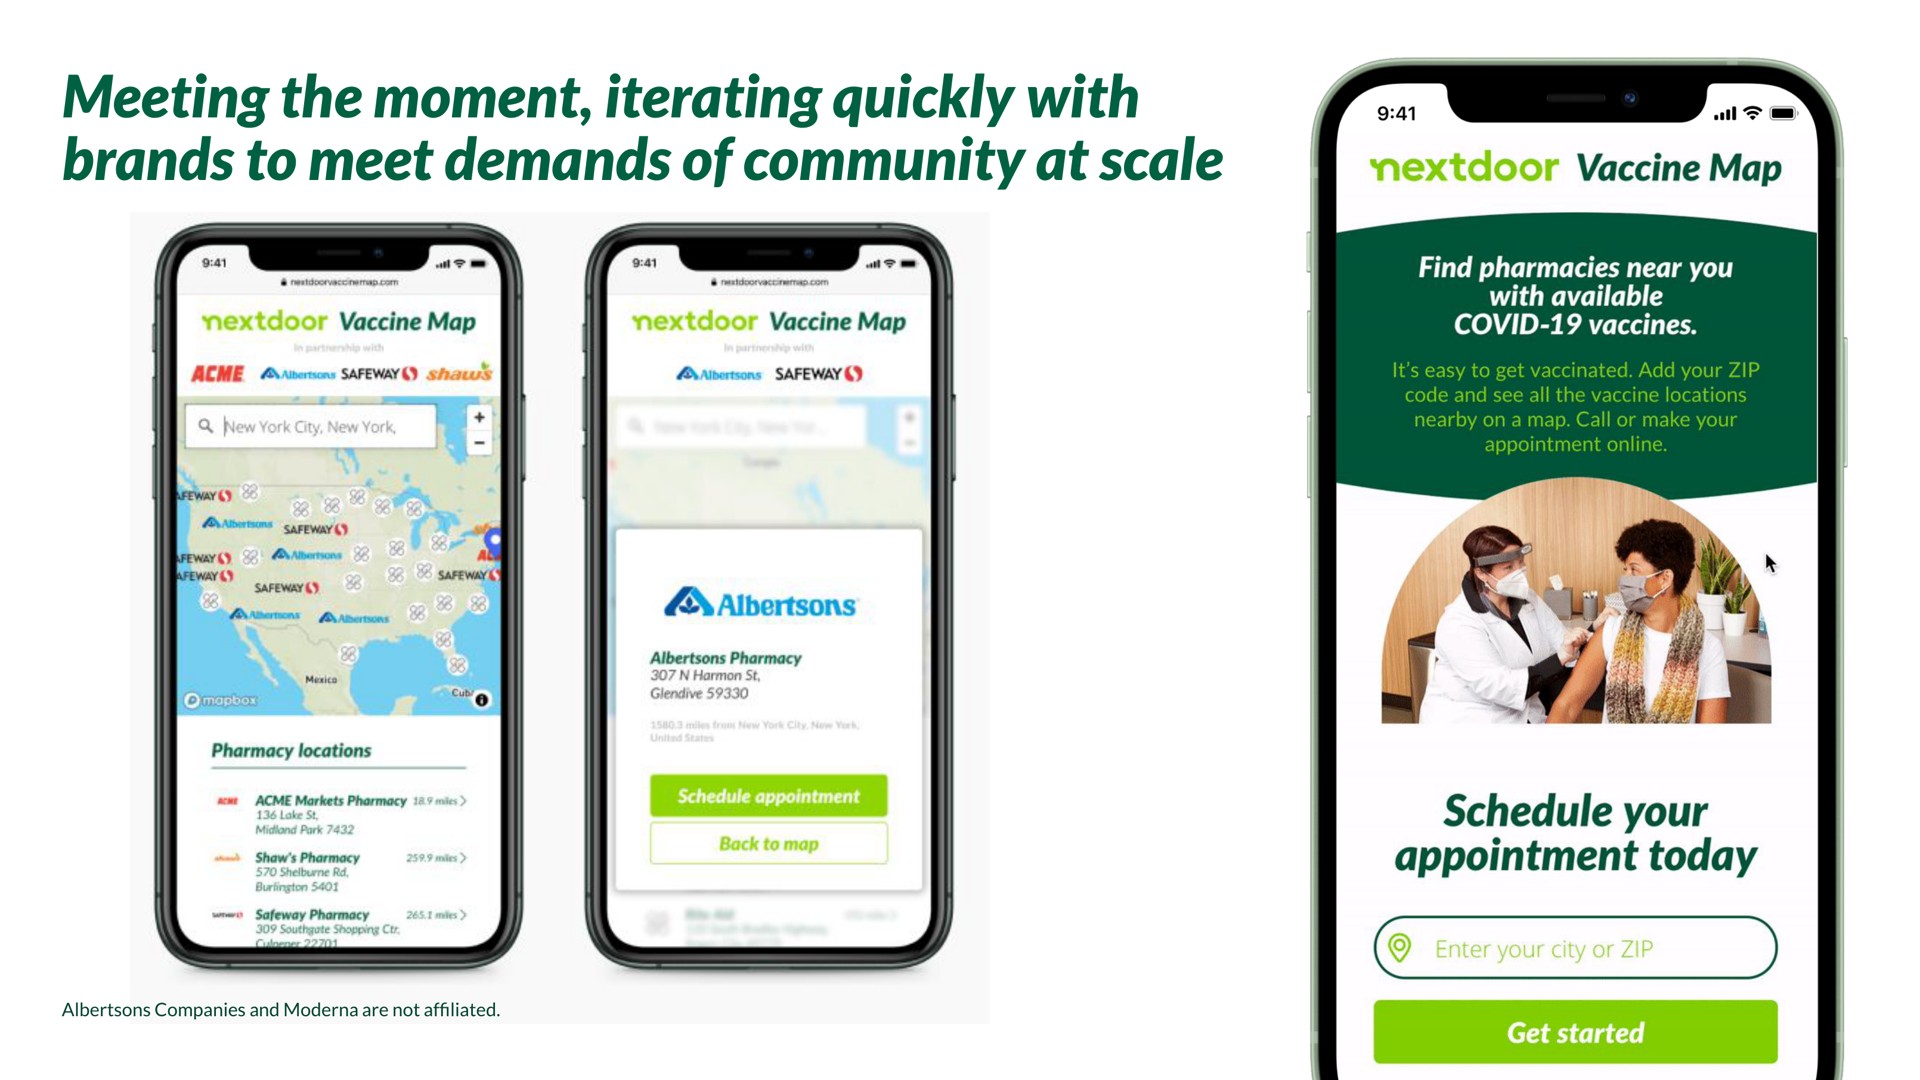 meeting the moment iterating quickly with brands to meet demands of community at scale | Nextdoor